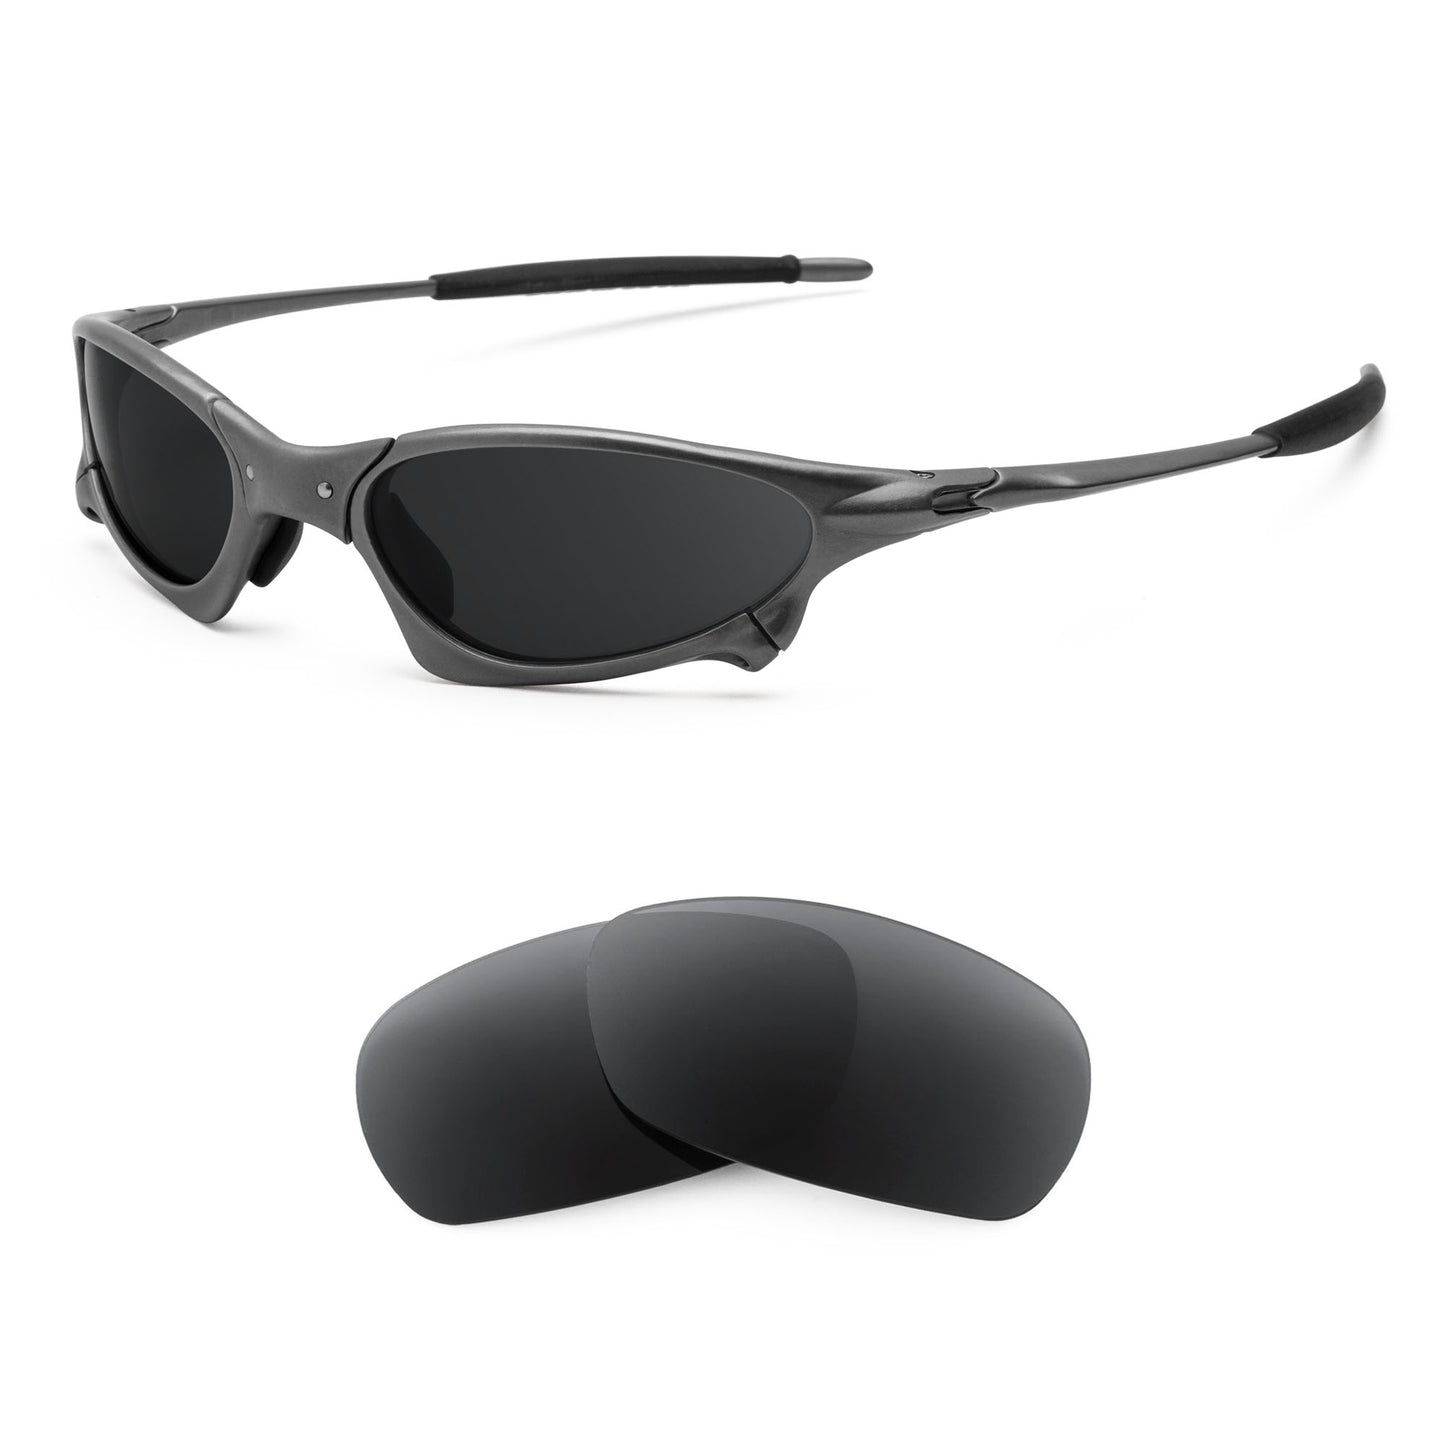 Oakley Penny sunglasses with replacement lenses